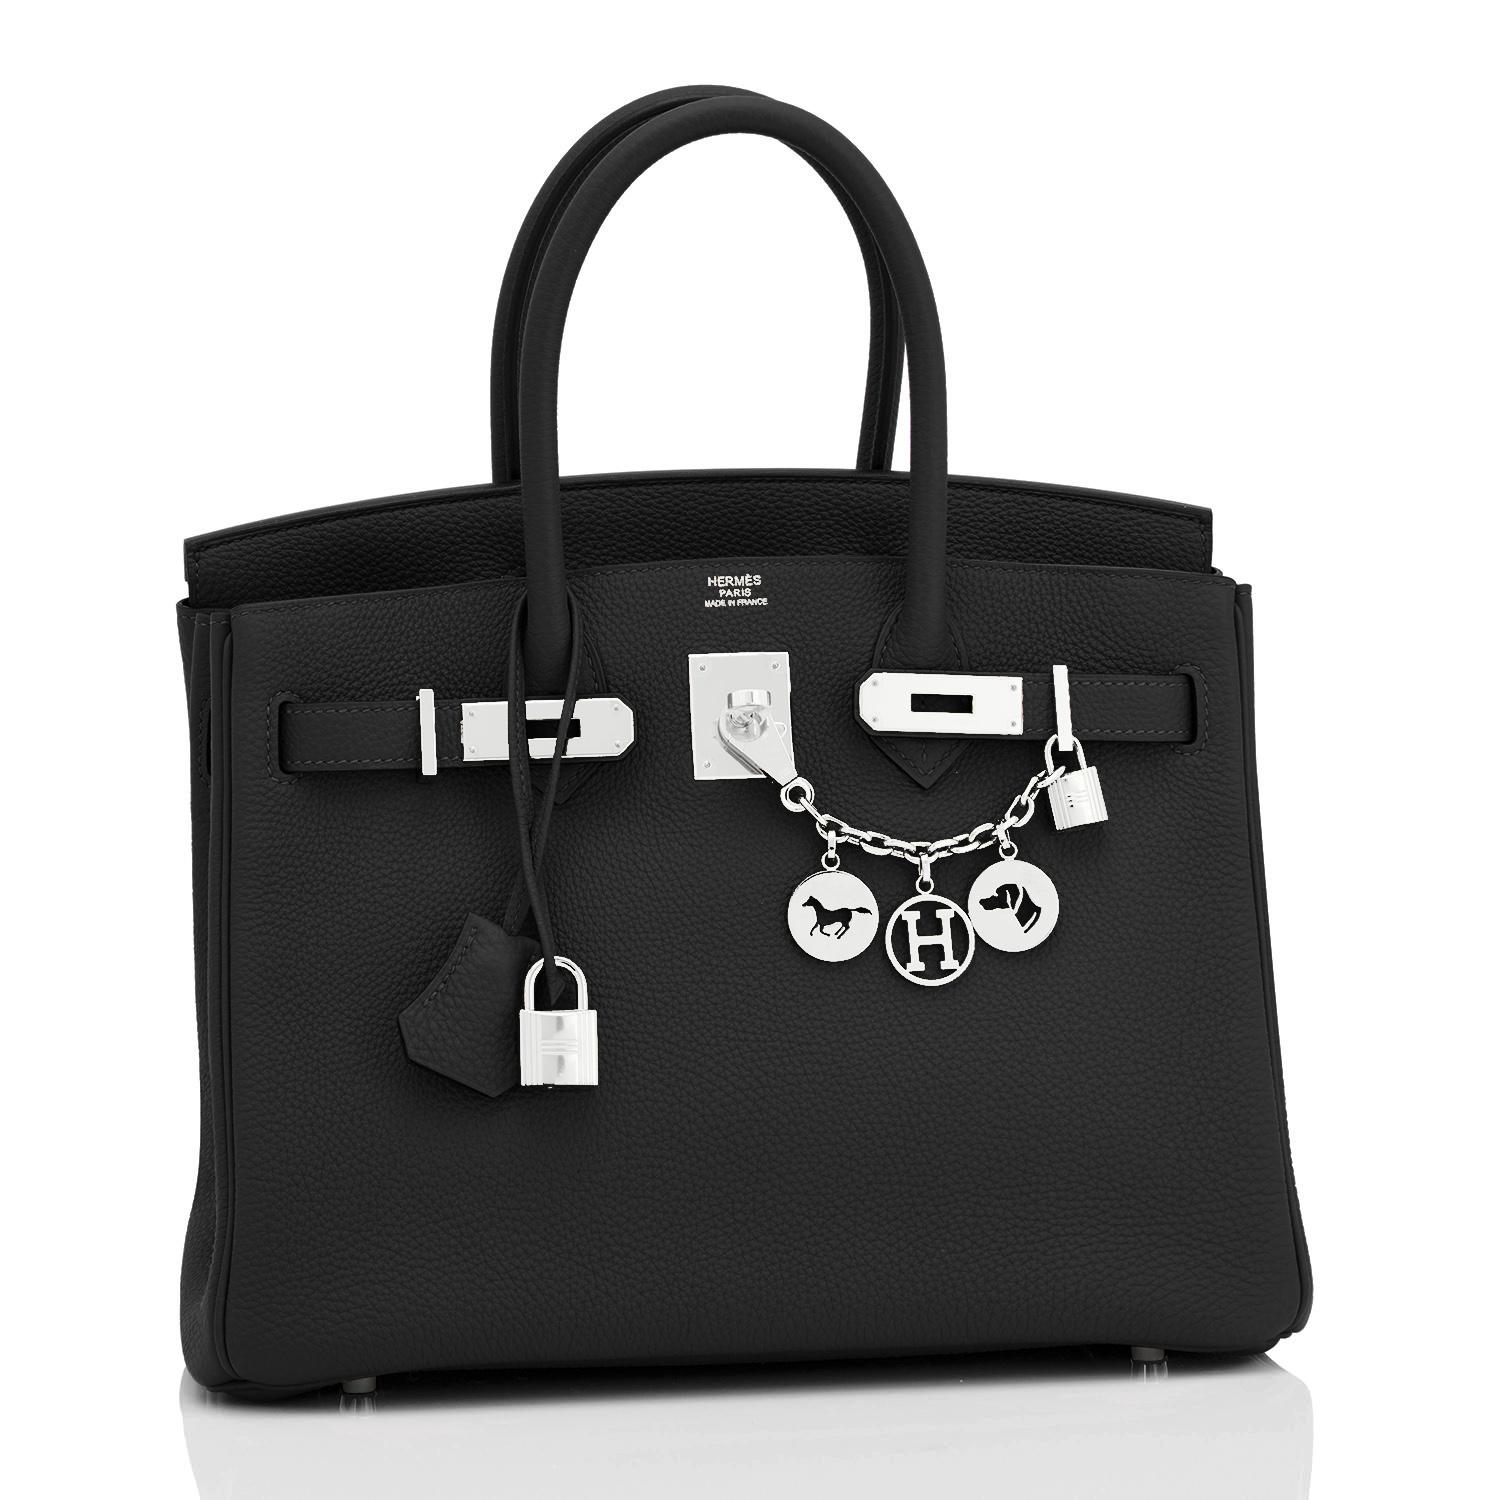 Hermes Birkin 30cm Black Togo Palladium Hardware Bag Z Stamp, 2021
Just purchased from Hermes store; bag bears new 2021 interior Z Stamp.
Brand New in Box. Store Fresh. Pristine Condition (with plastic on hardware)
Perfect gift! Comes with keys,